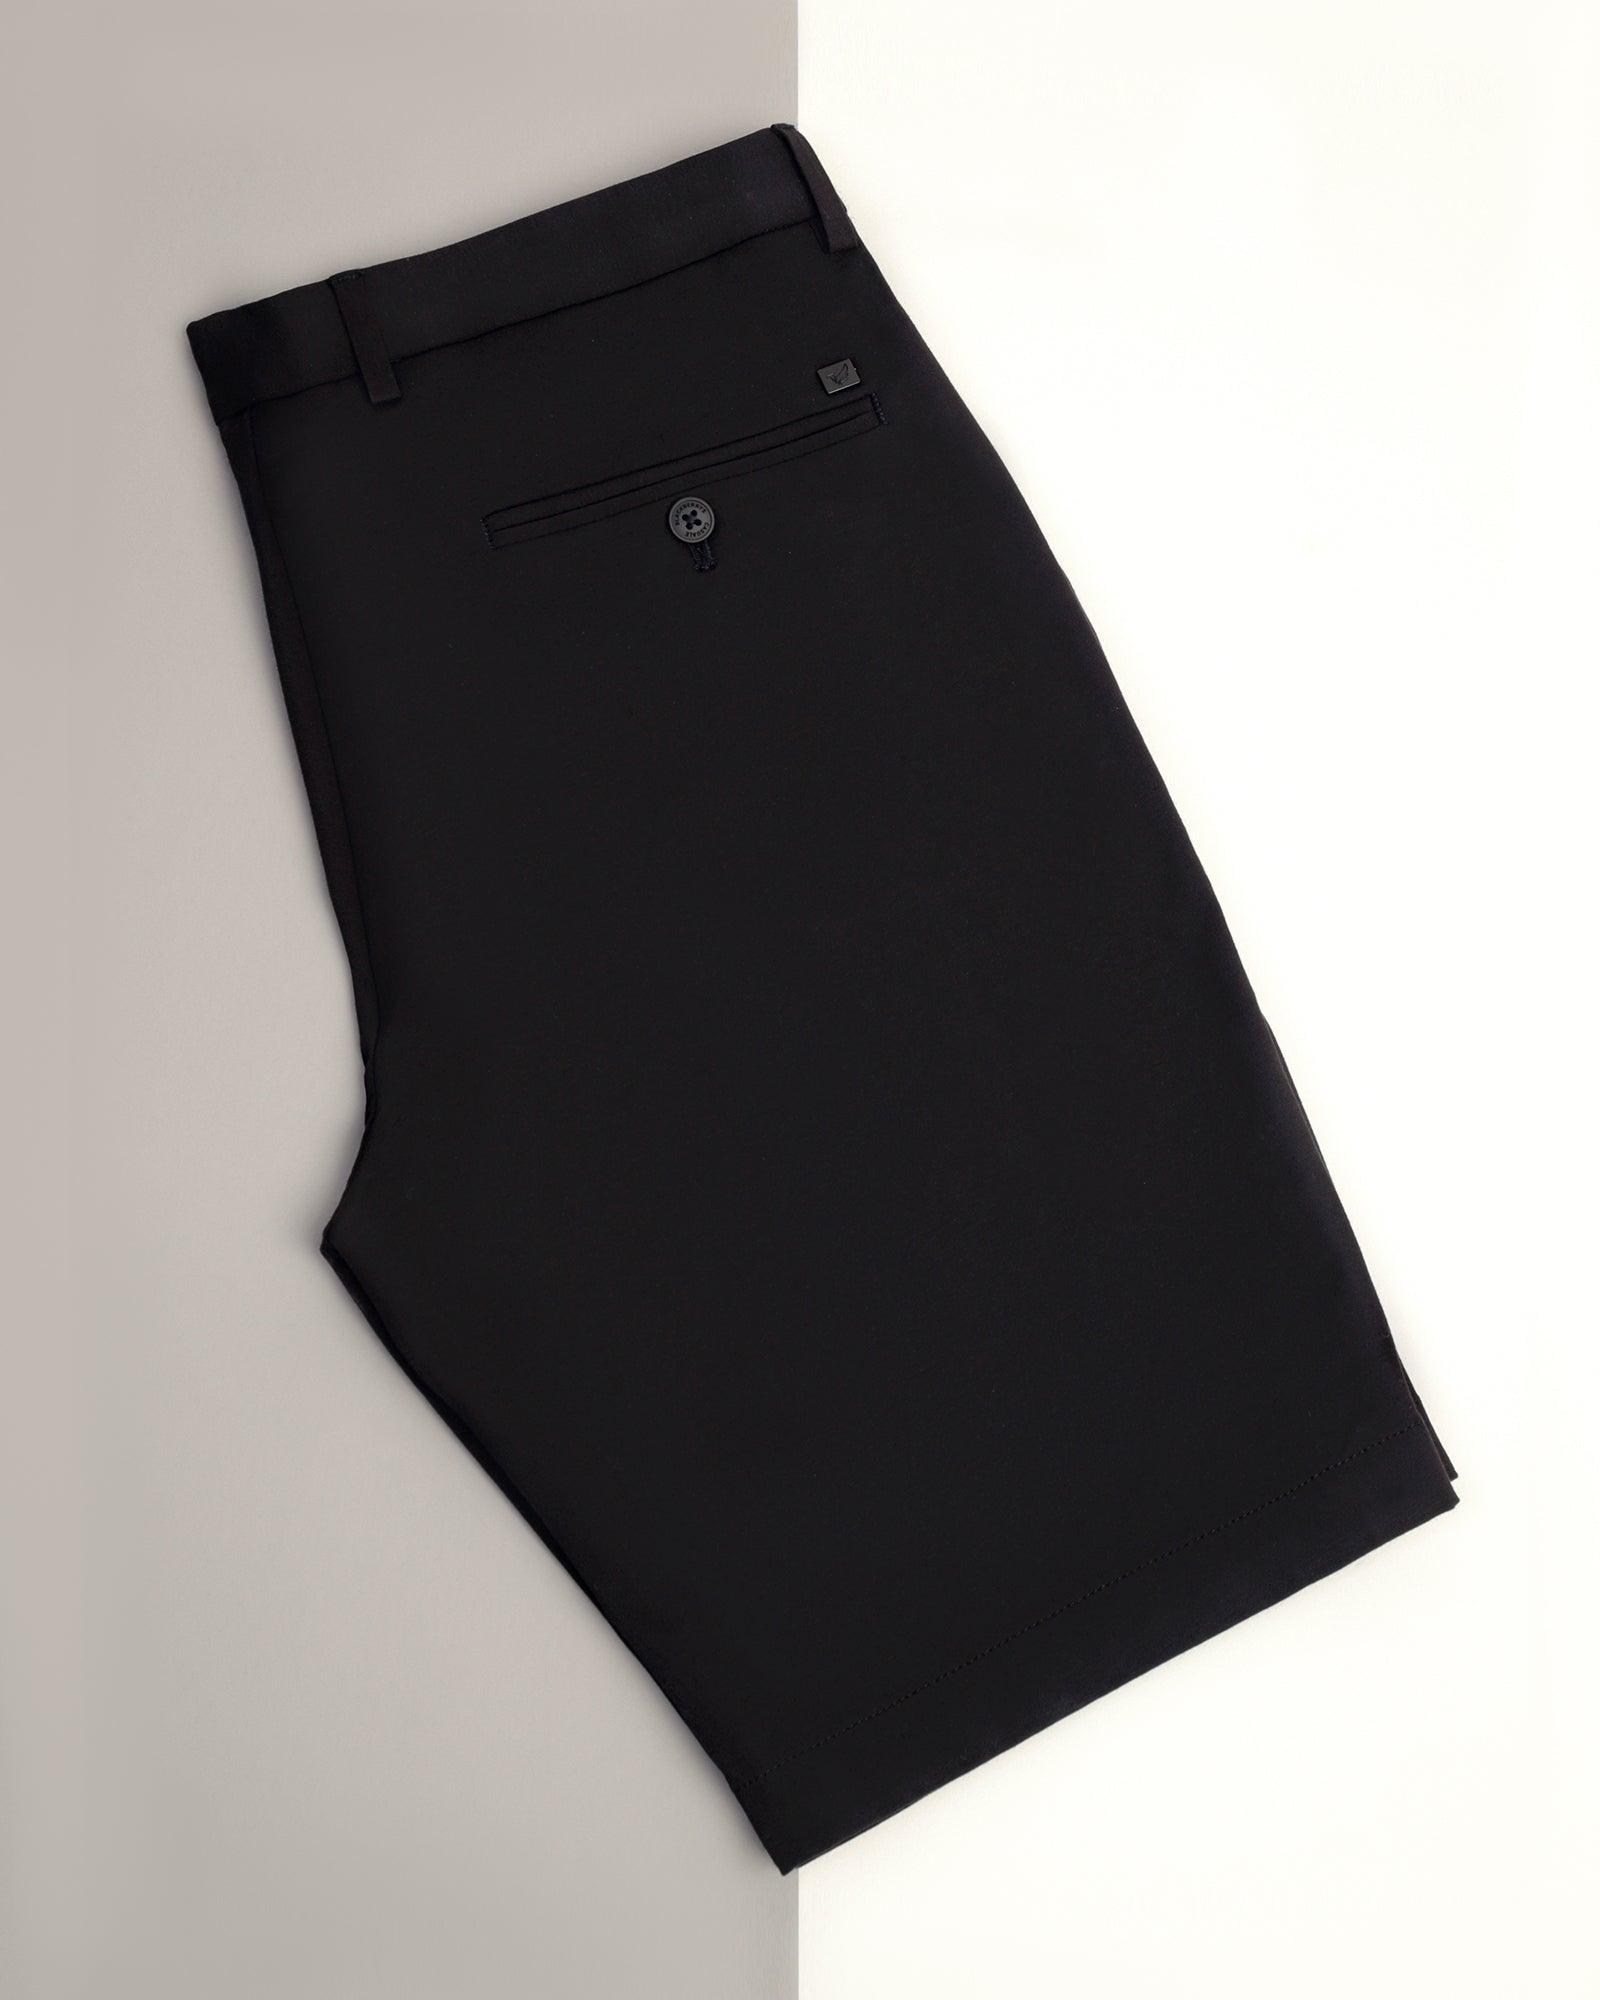 TechPro Casual Black Solid Shorts - Serry